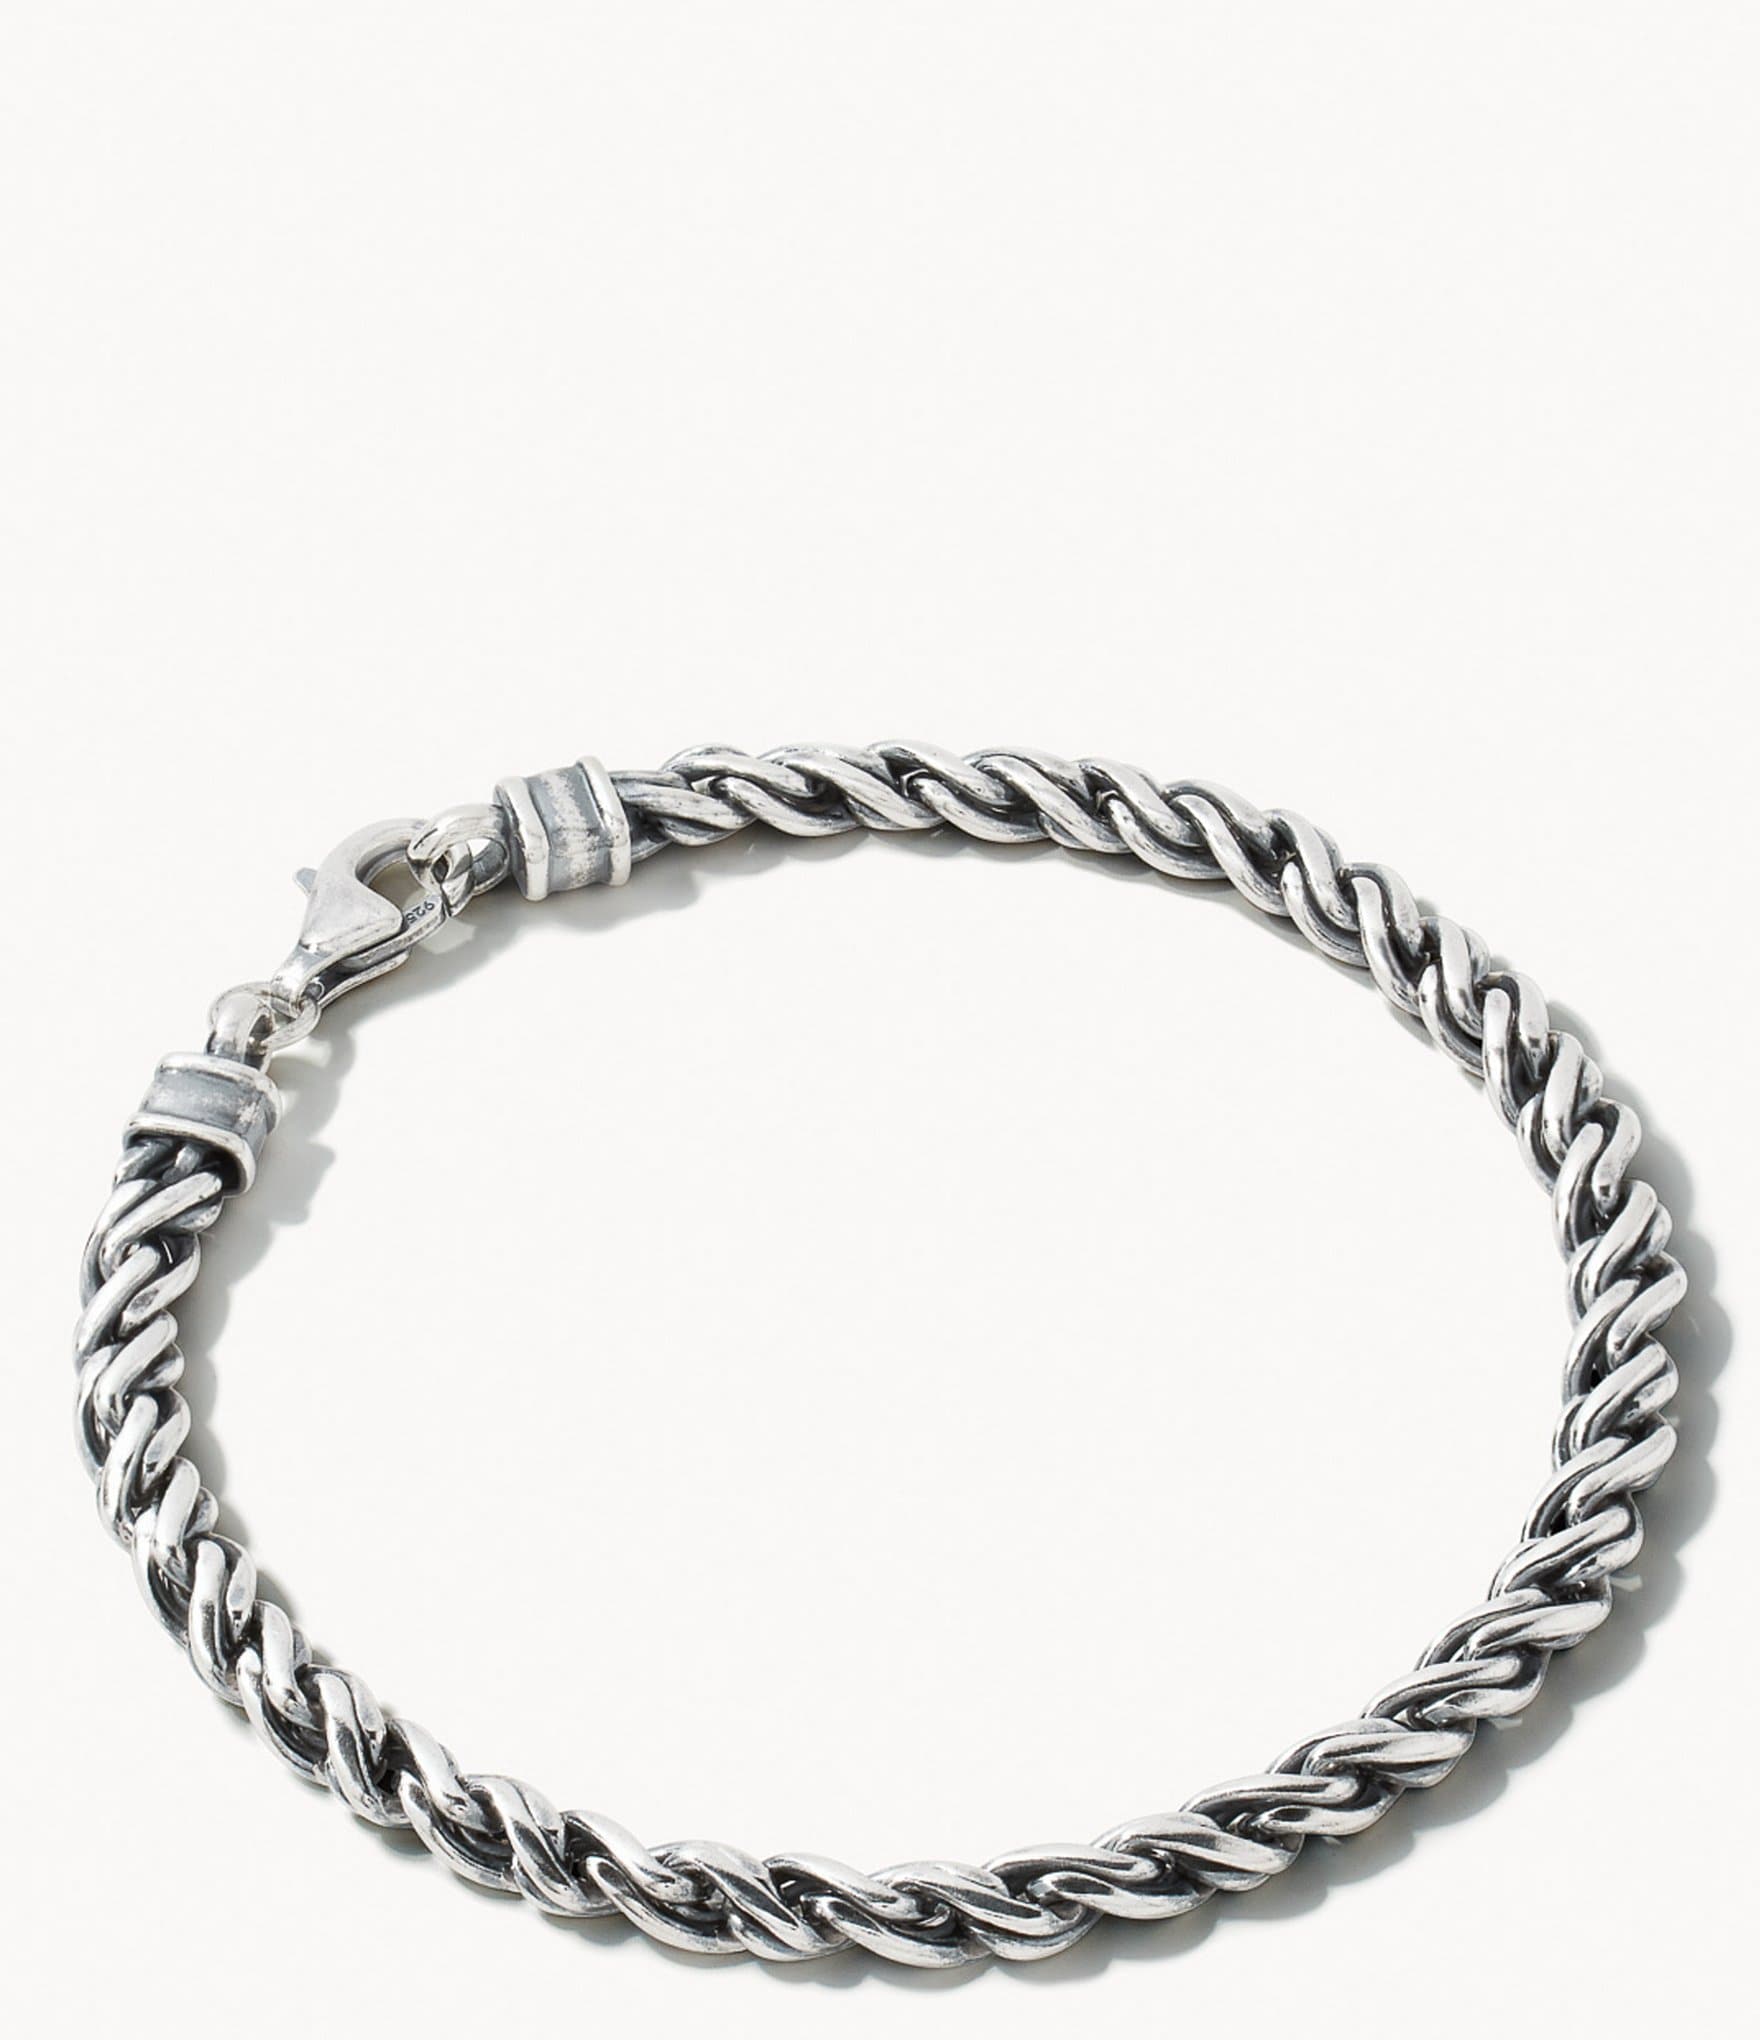 Silver chains for men by menjewell.com